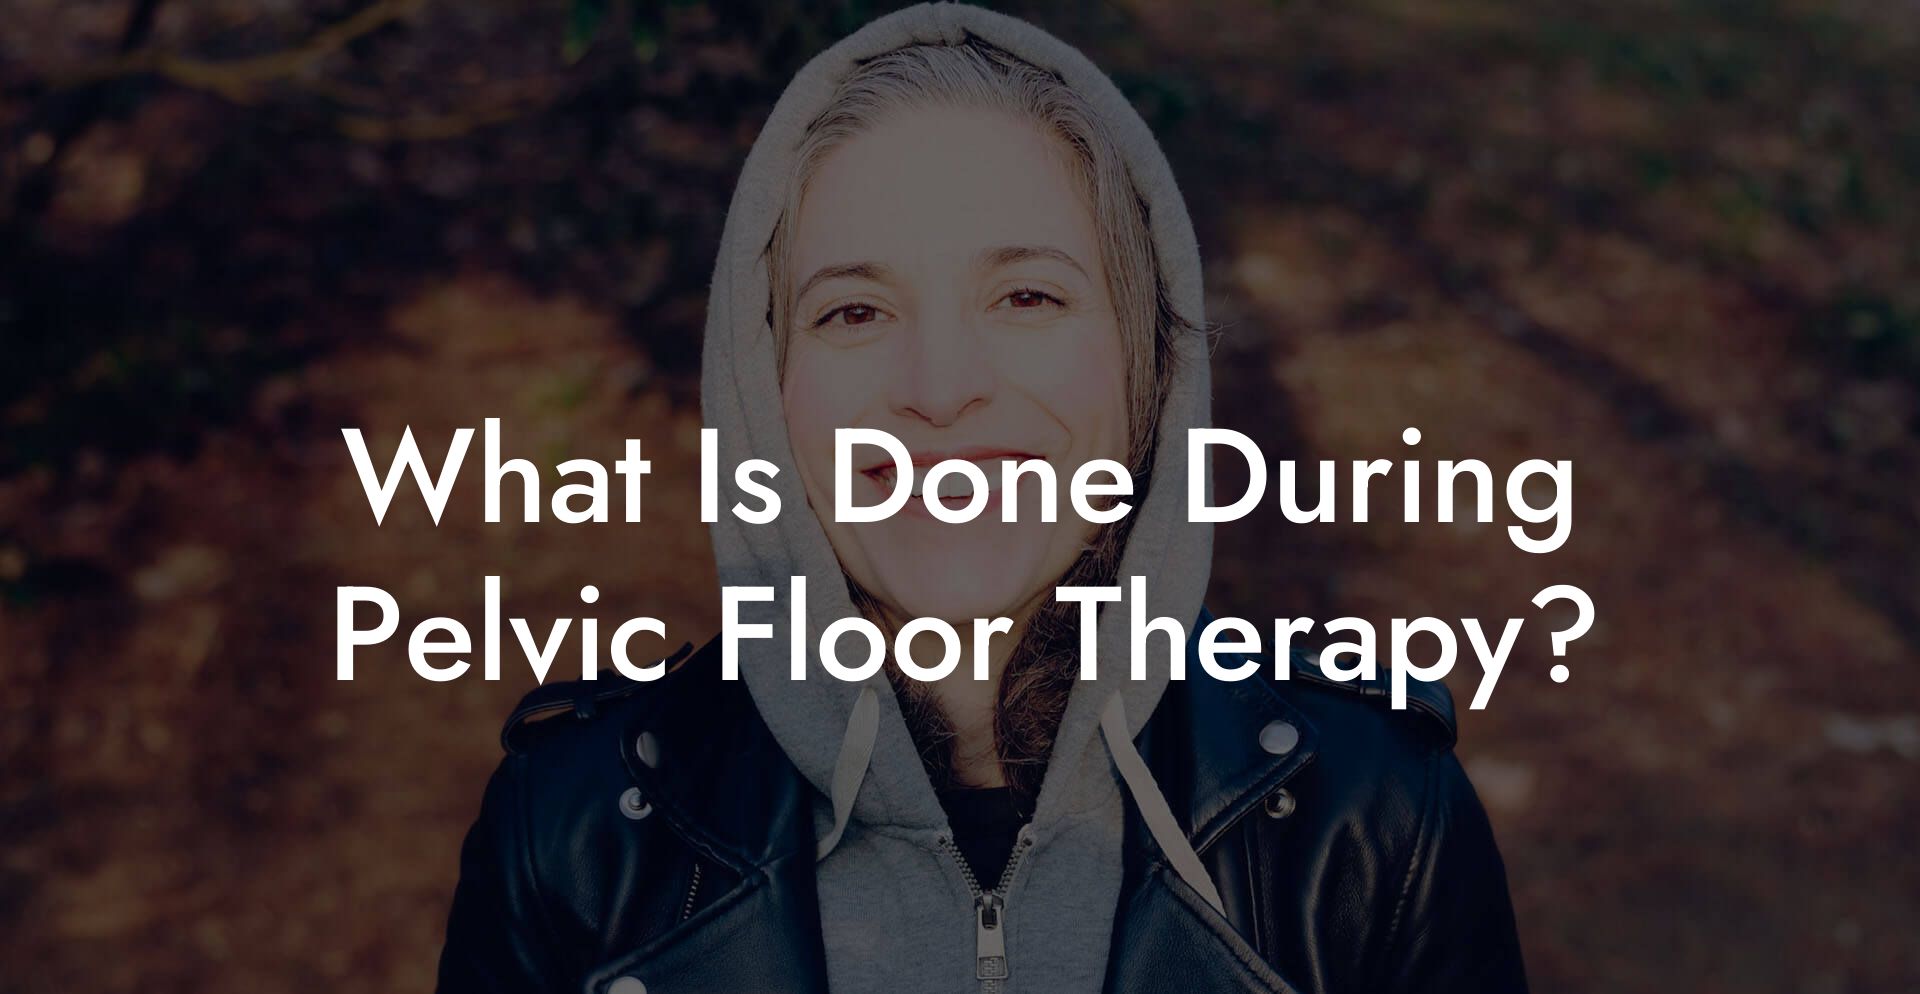 What Is Done During Pelvic Floor Therapy?